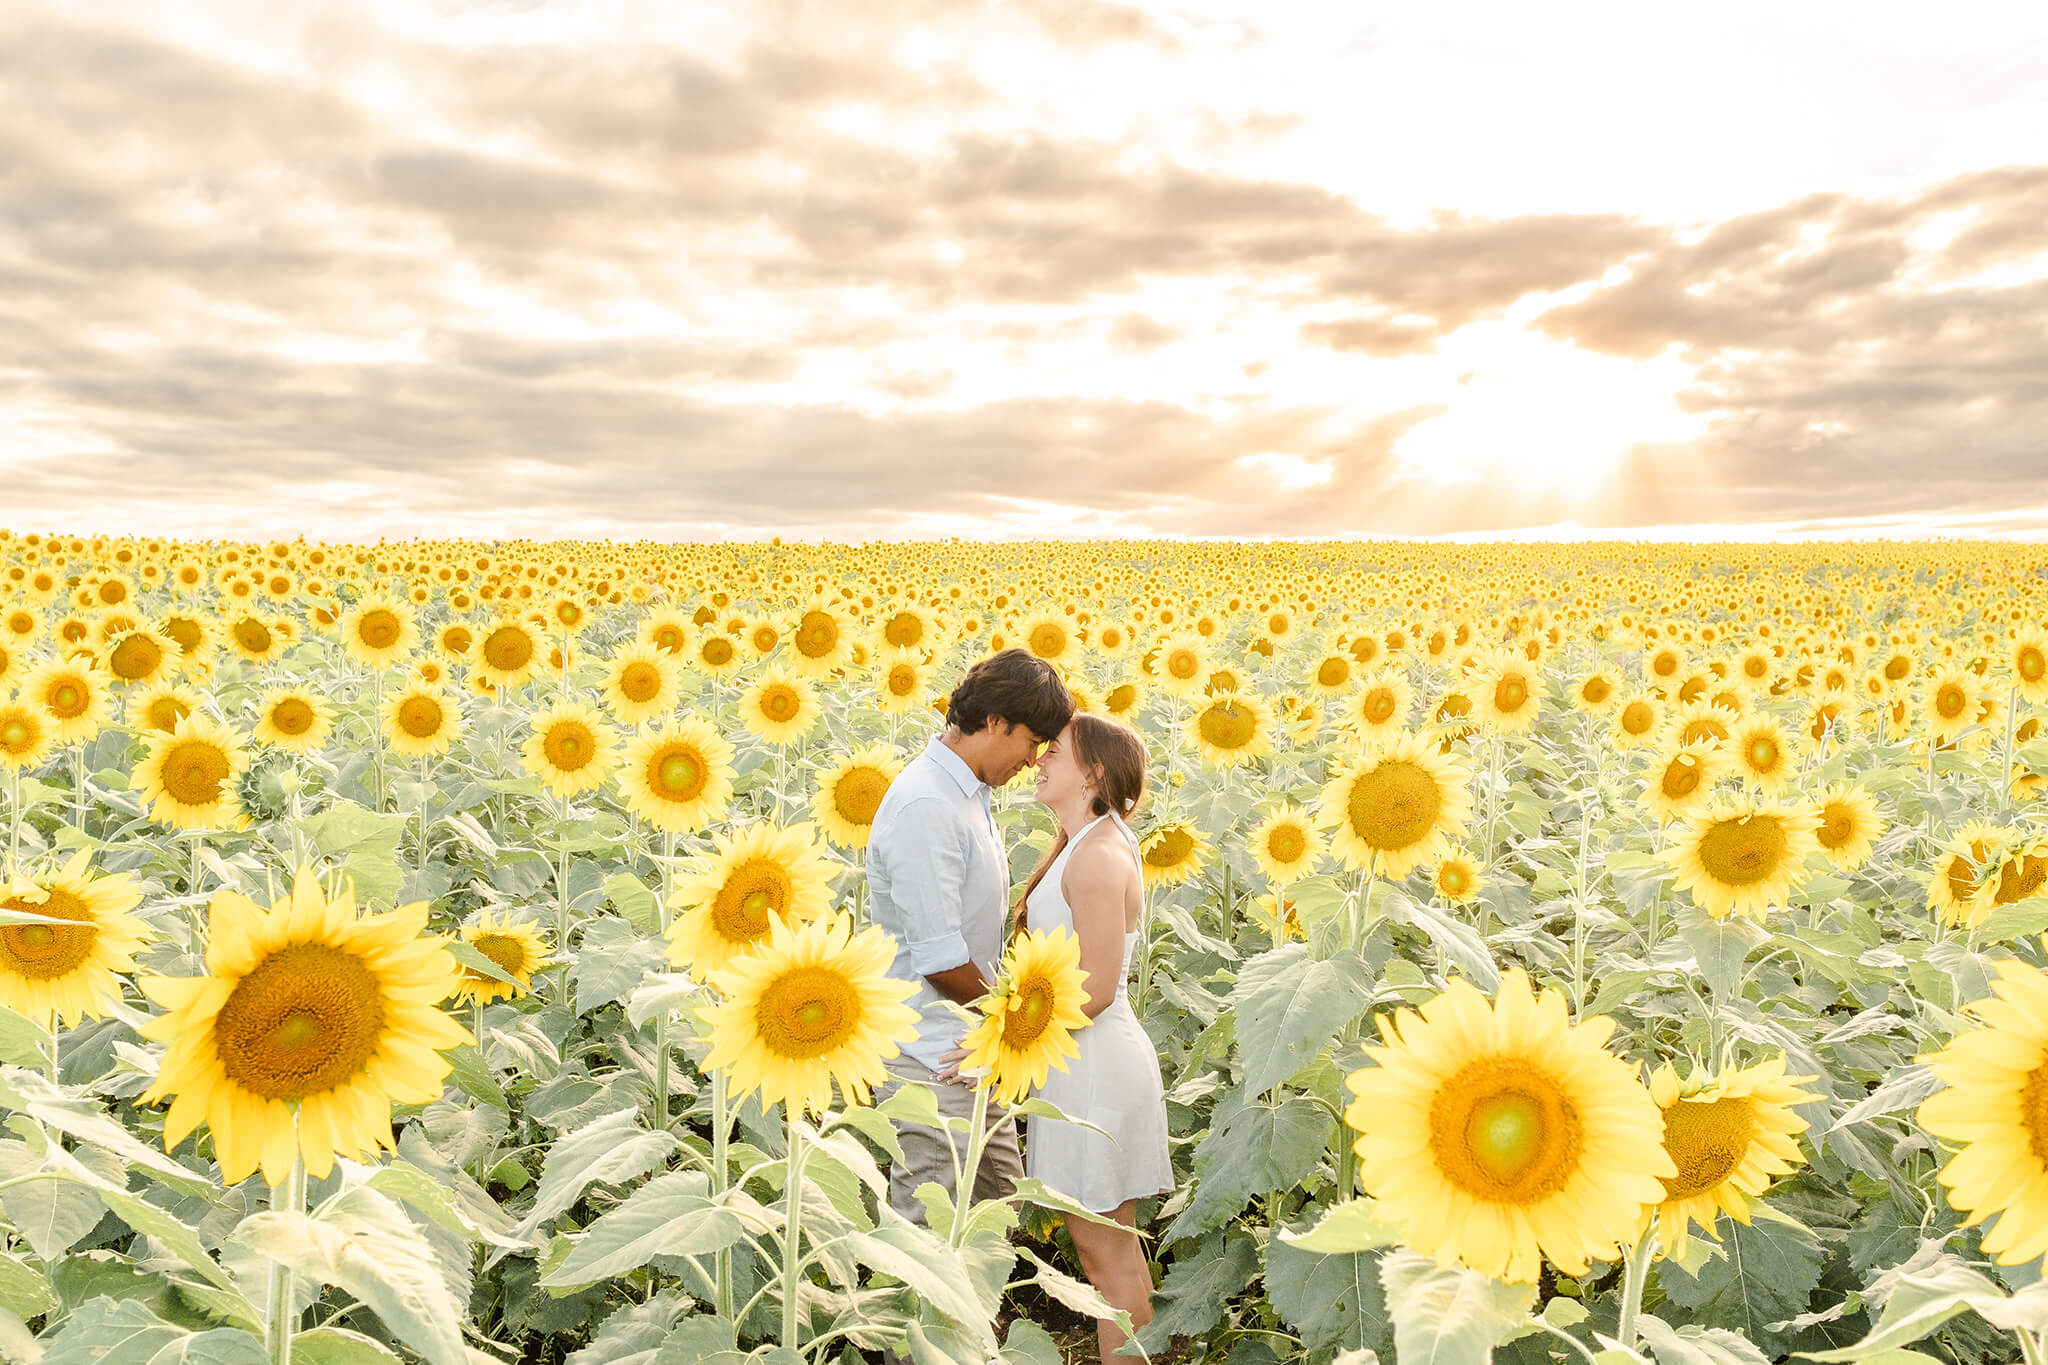 couple sharing intimate shot during engagement shoot in sunflower field brisbane